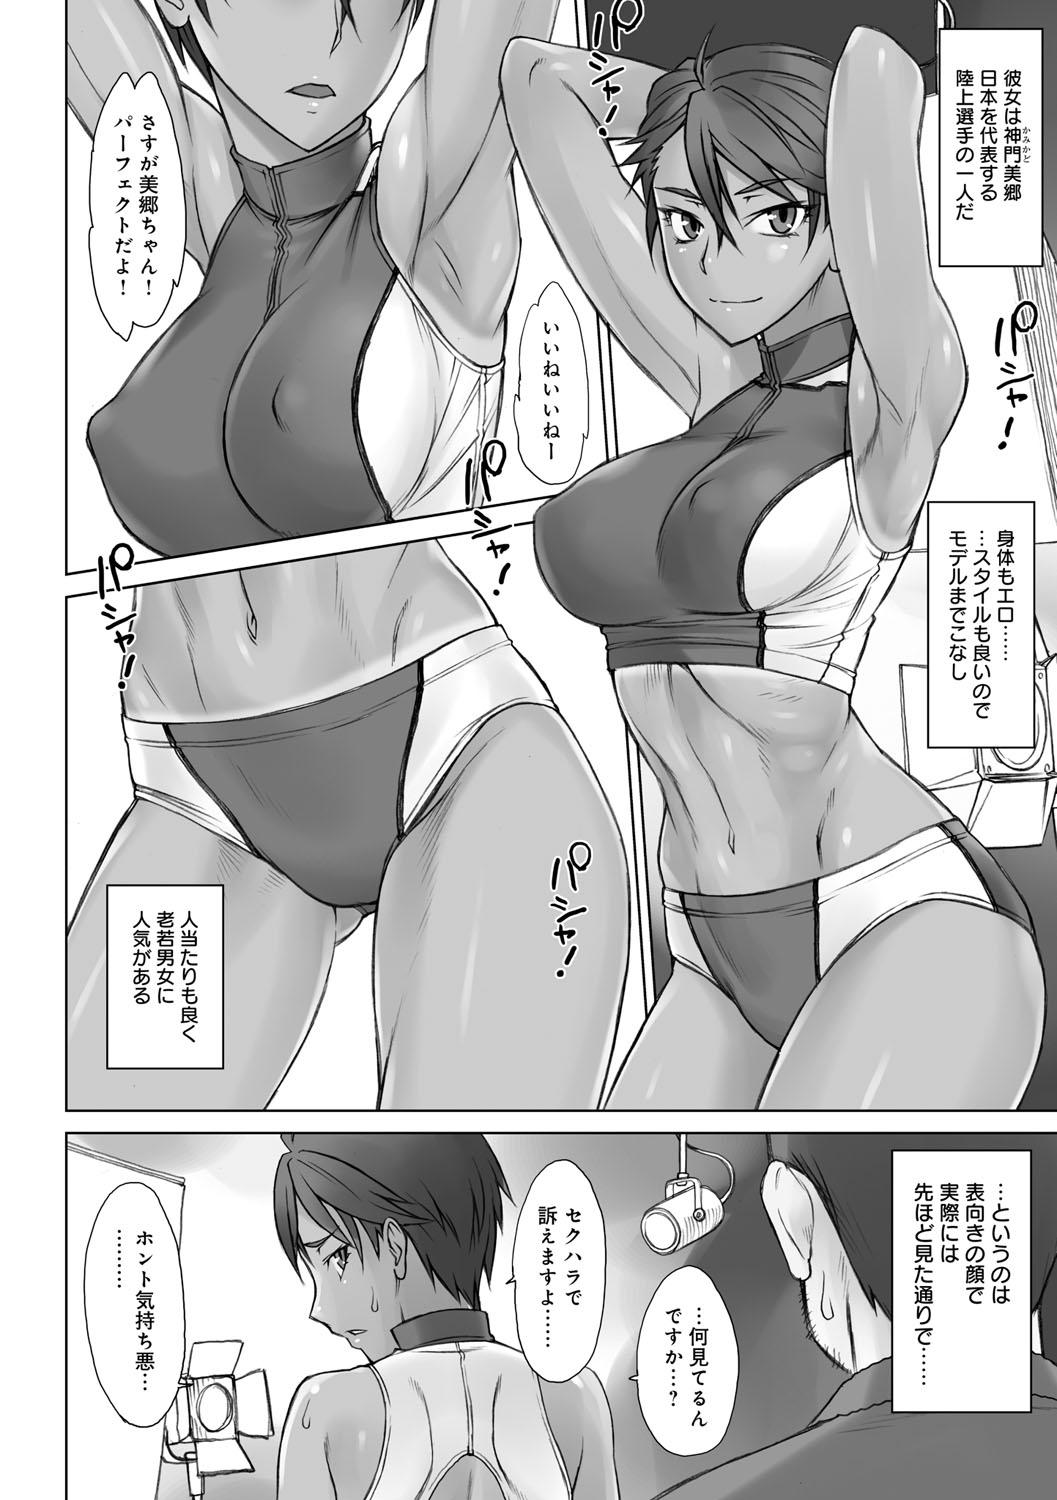 Shy Shidoukan Day after Asses - Page 7